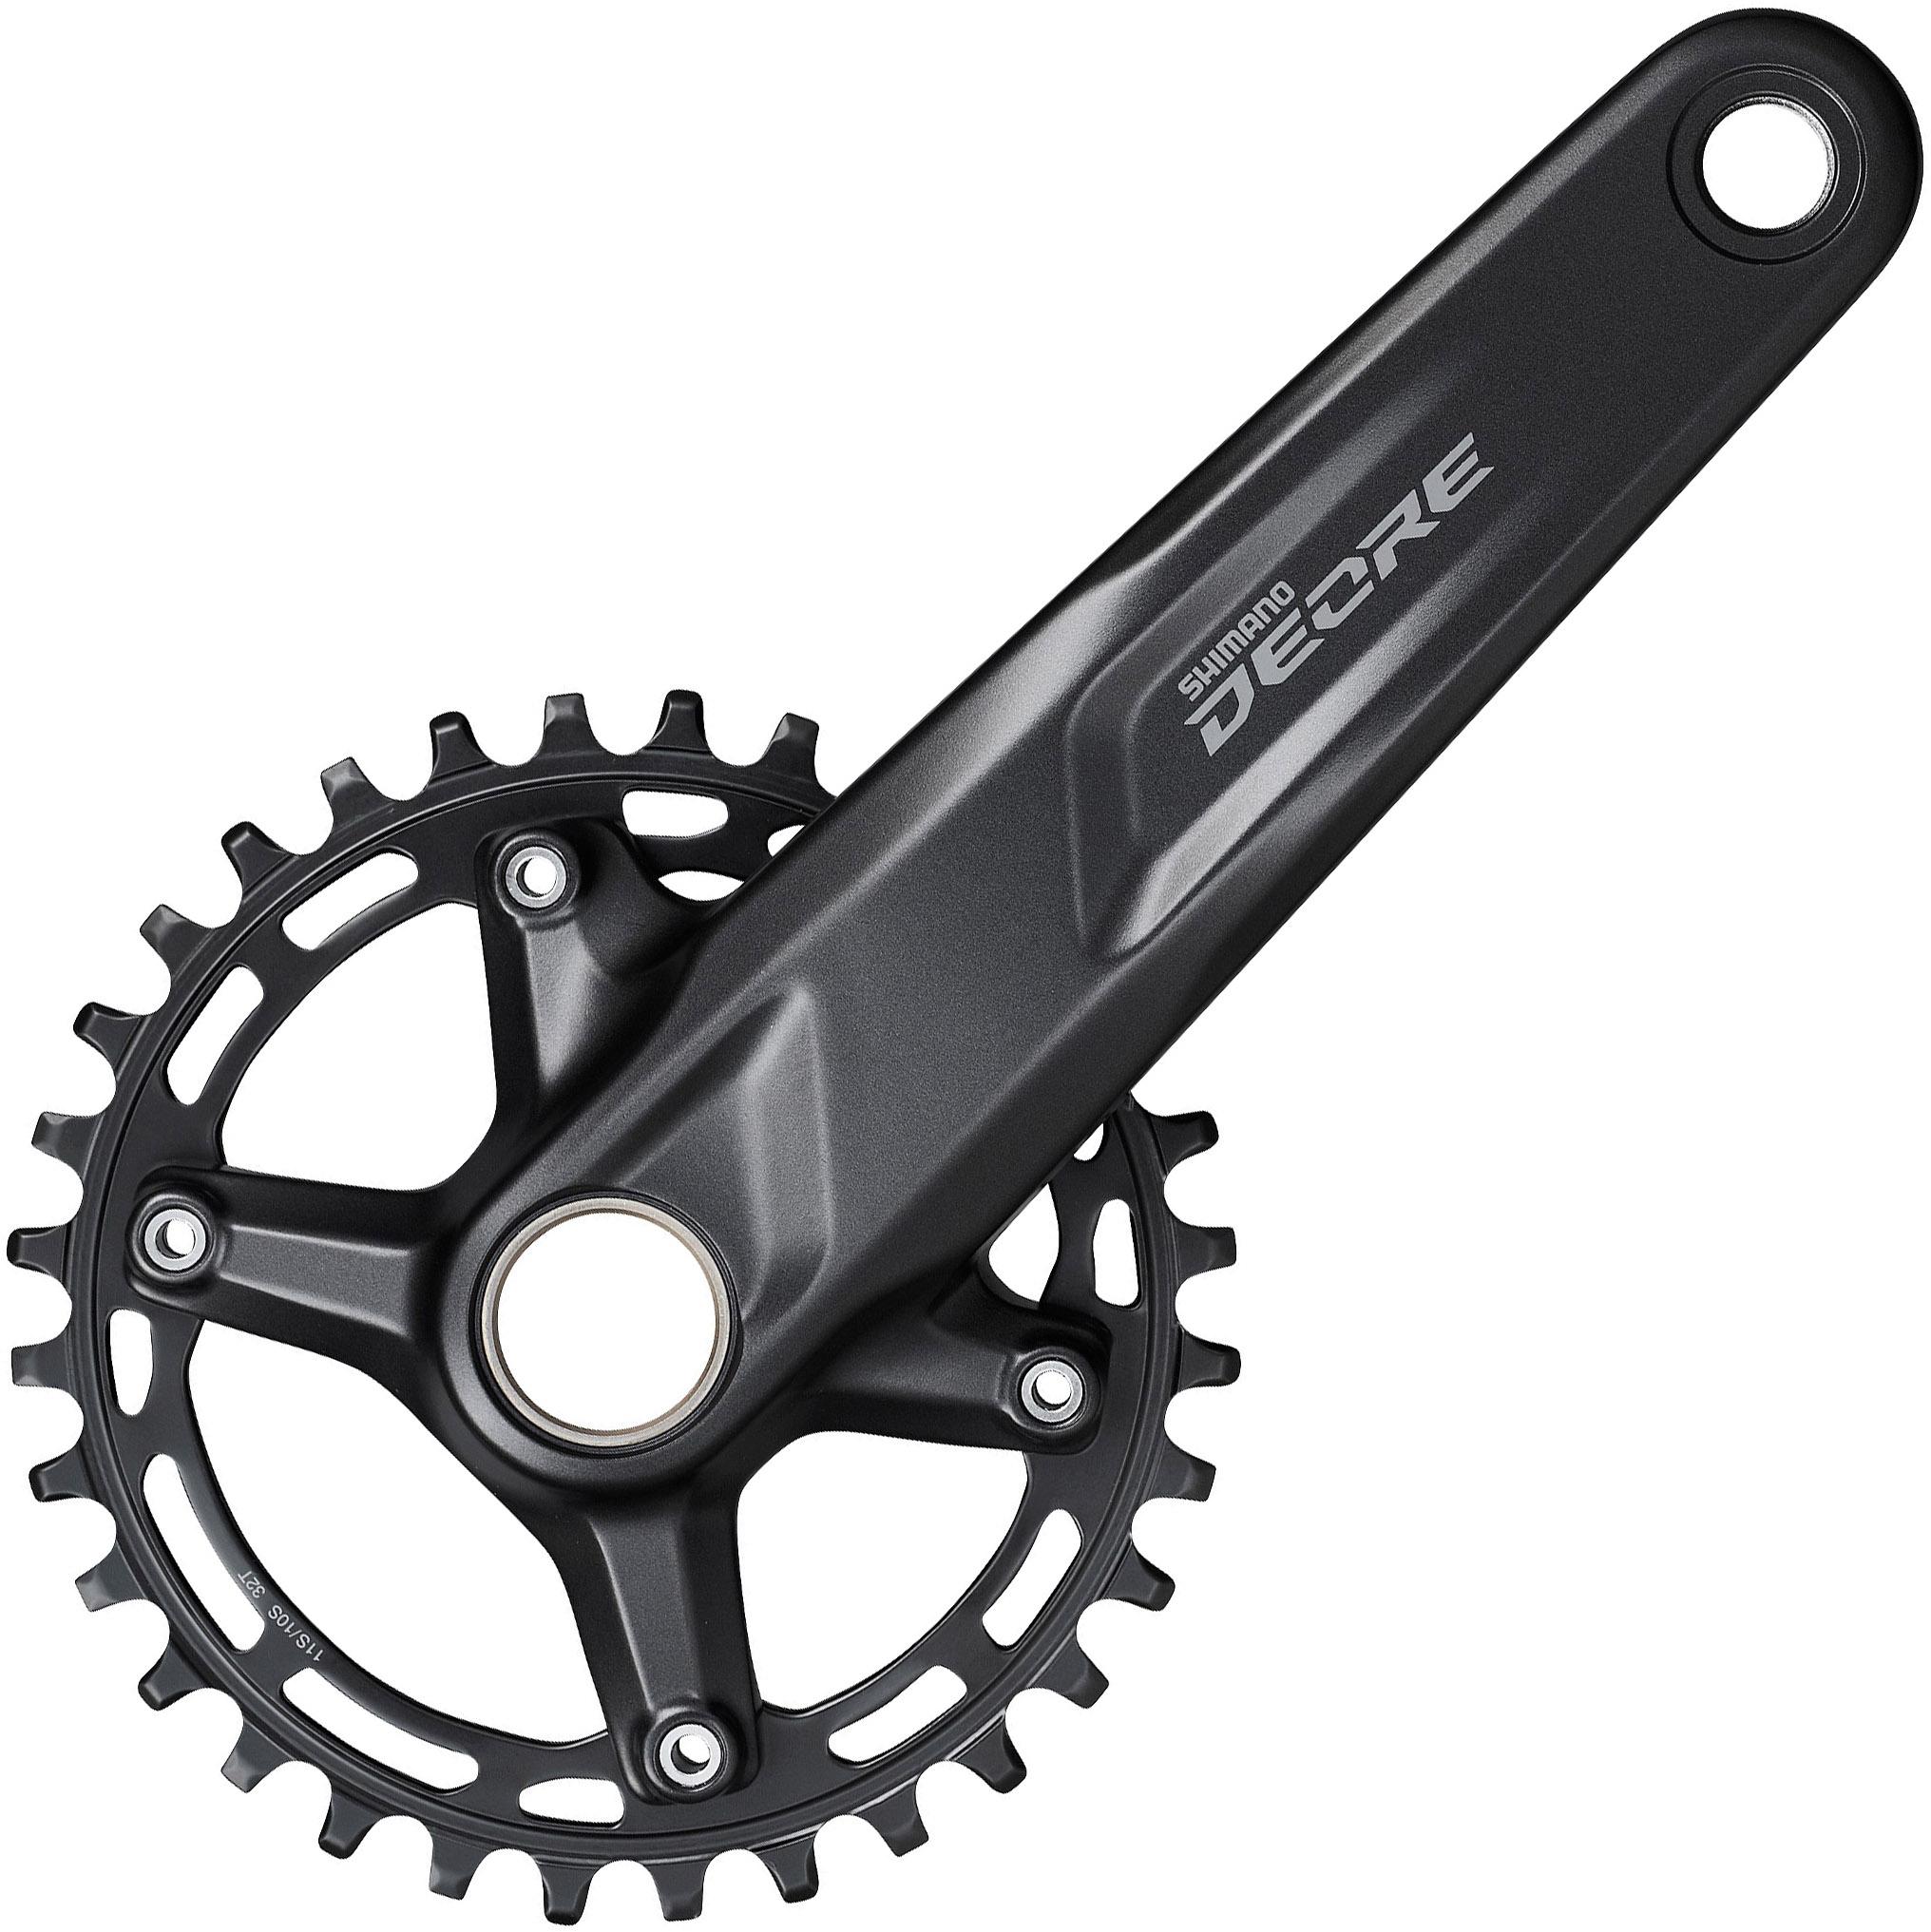 Shimano M5100 Deore 10-11 Speed Single Chainset  Black